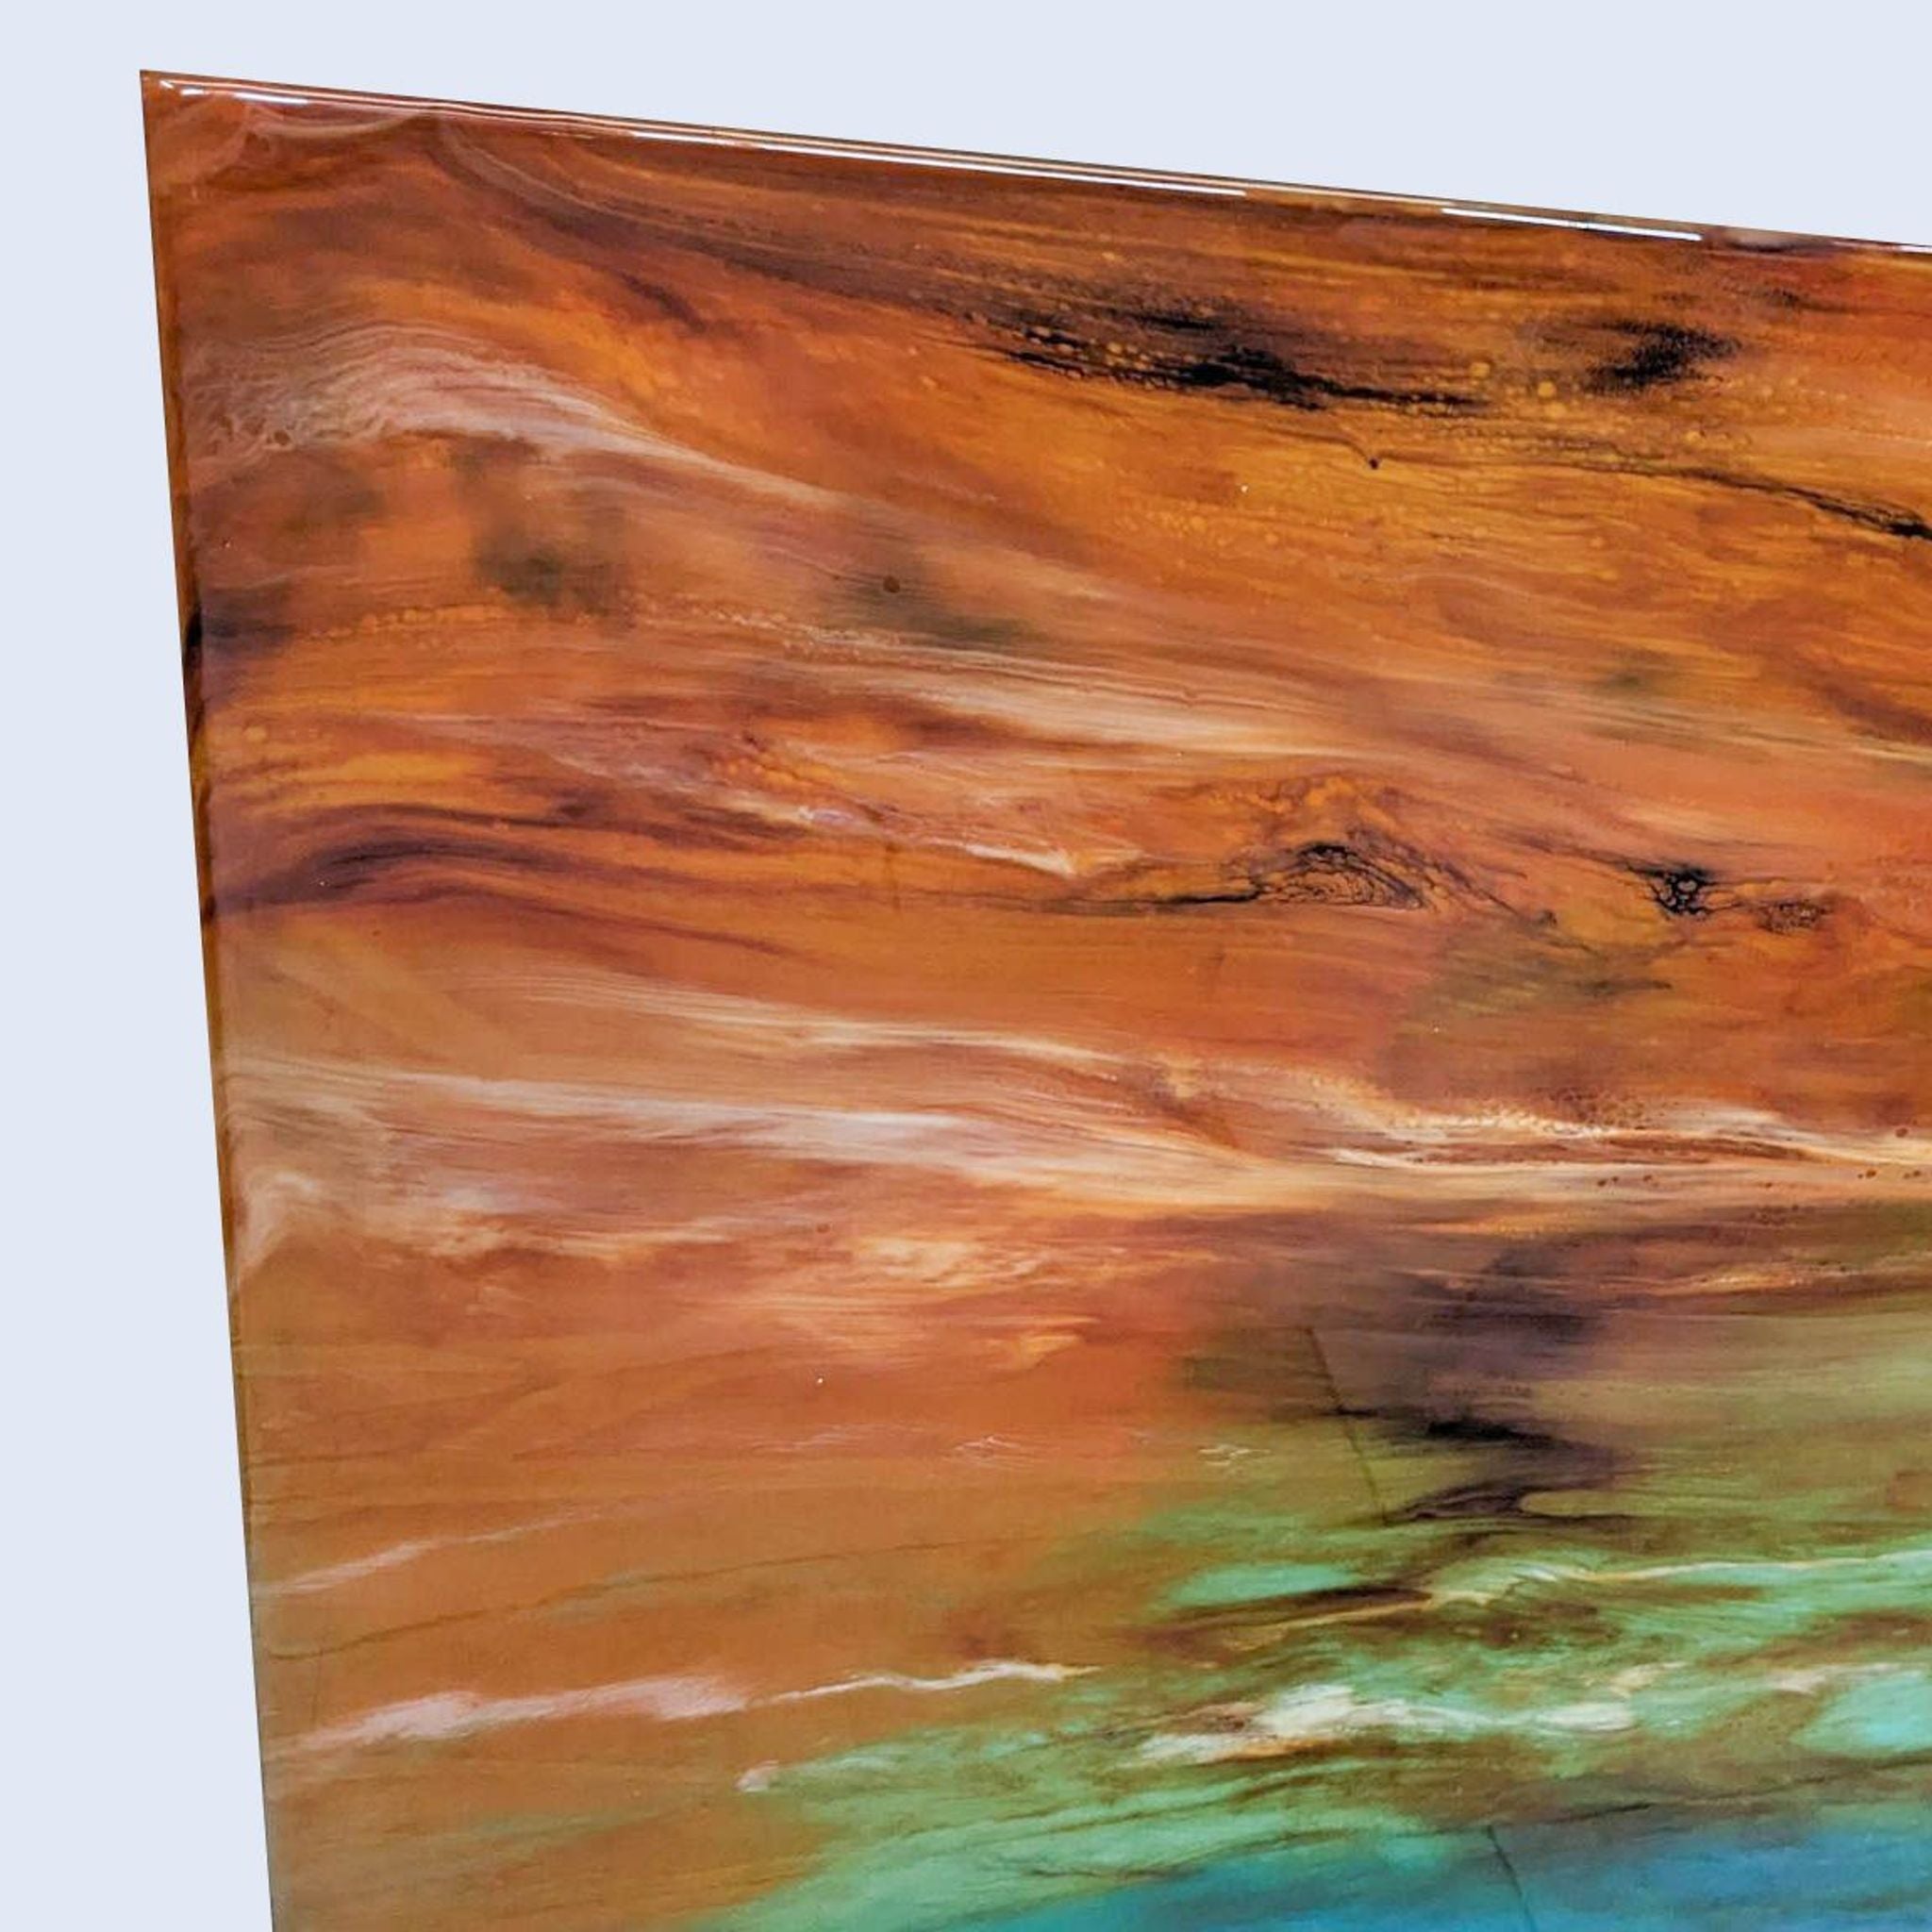 Colorful abstract painting by Christo Braun with a blurred transition from ocean blue to earthy orange tones, mounted vertically.